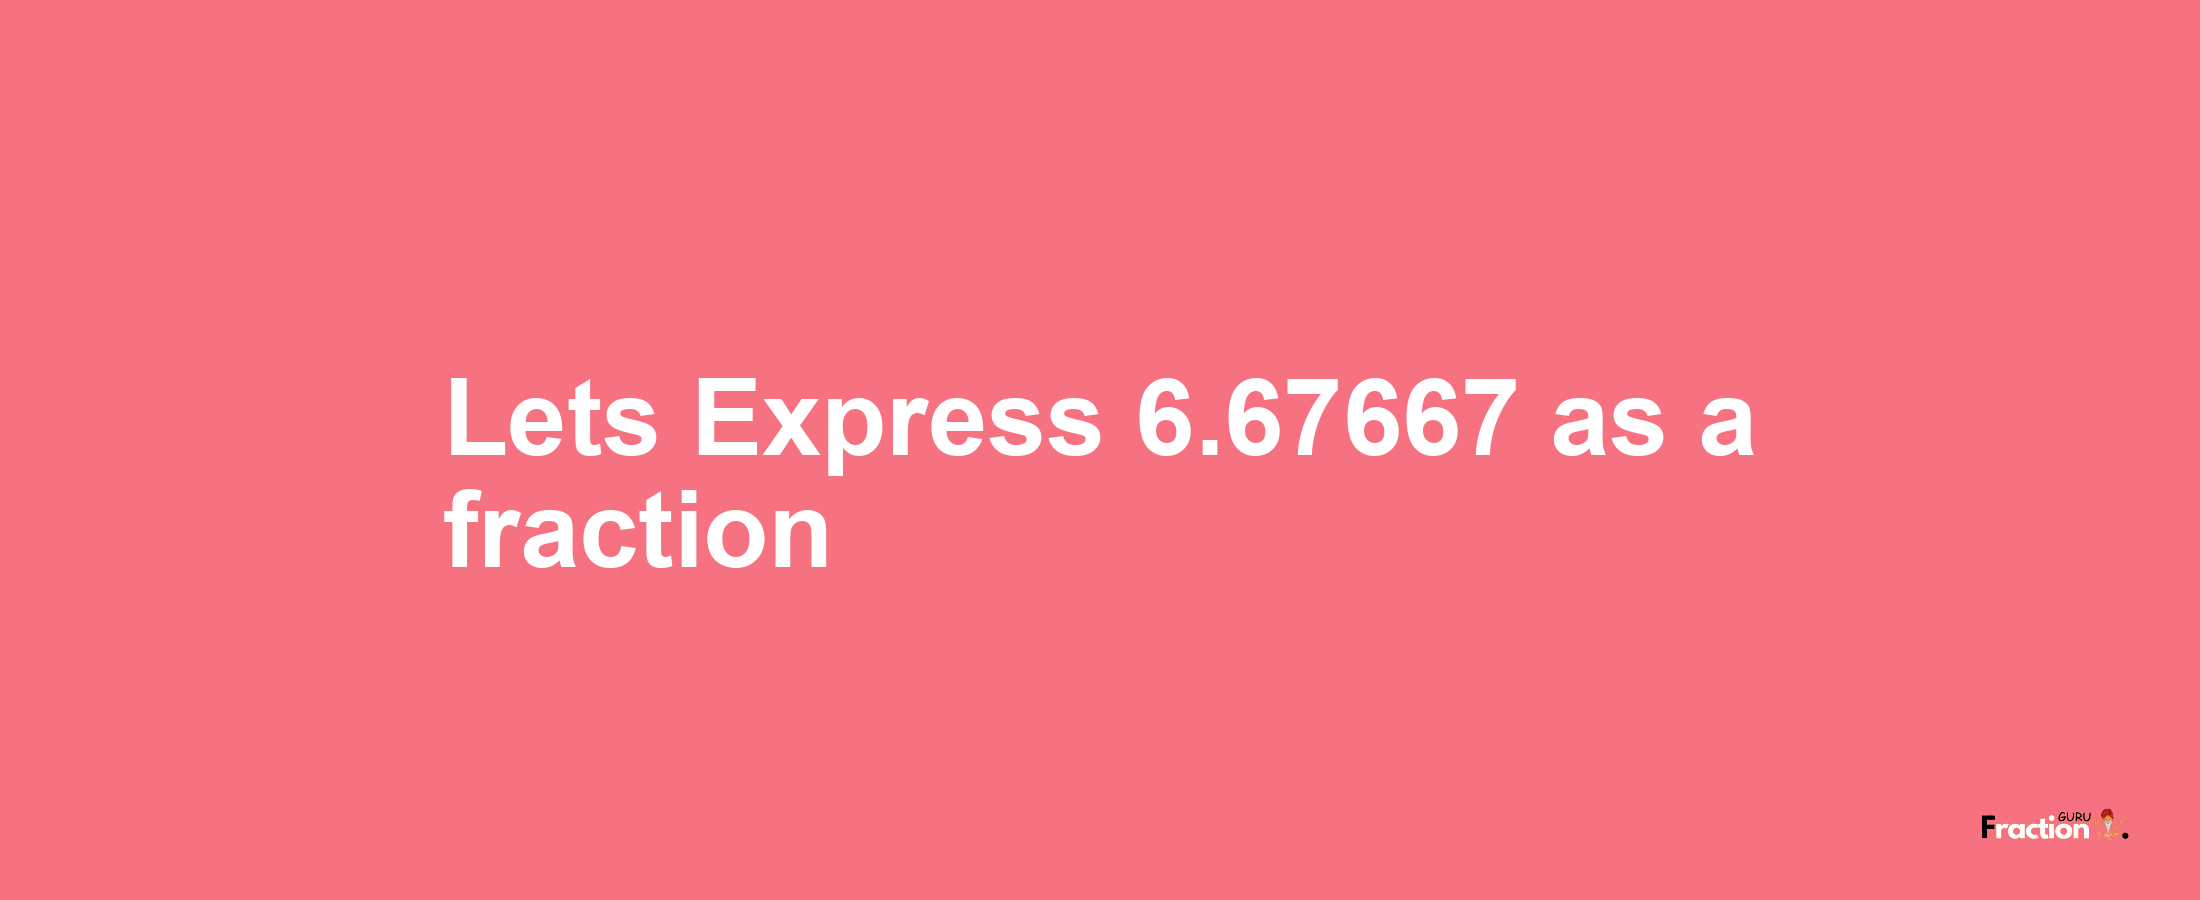 Lets Express 6.67667 as afraction